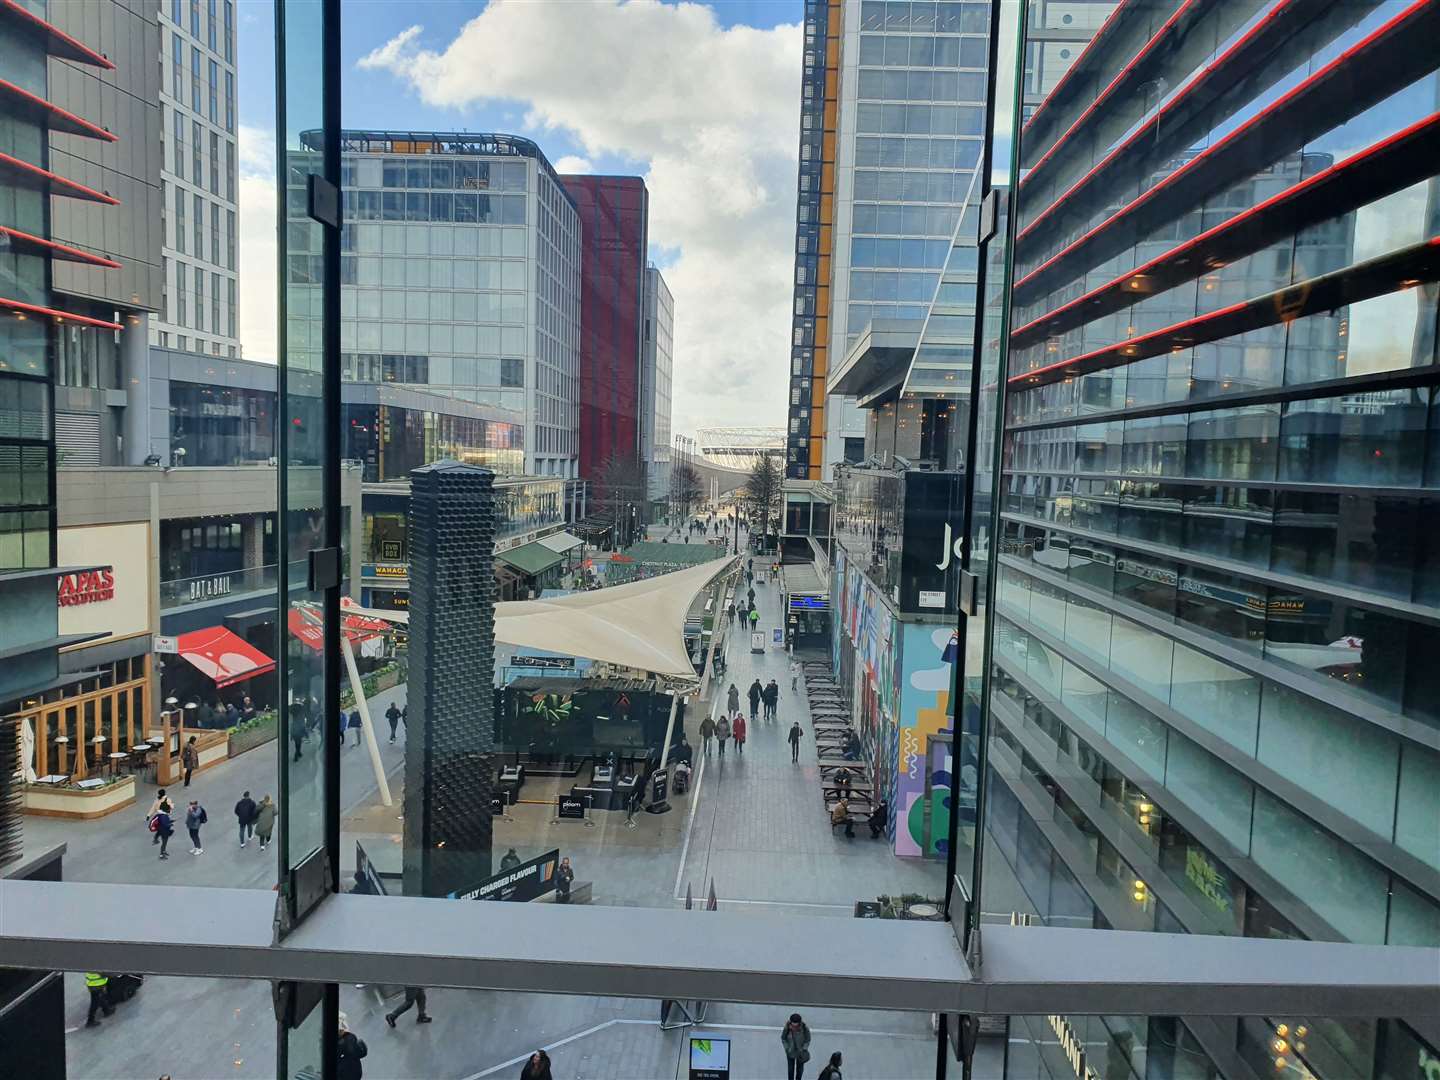 Part of the London Stadium is visible from inside Westfield Stratford City